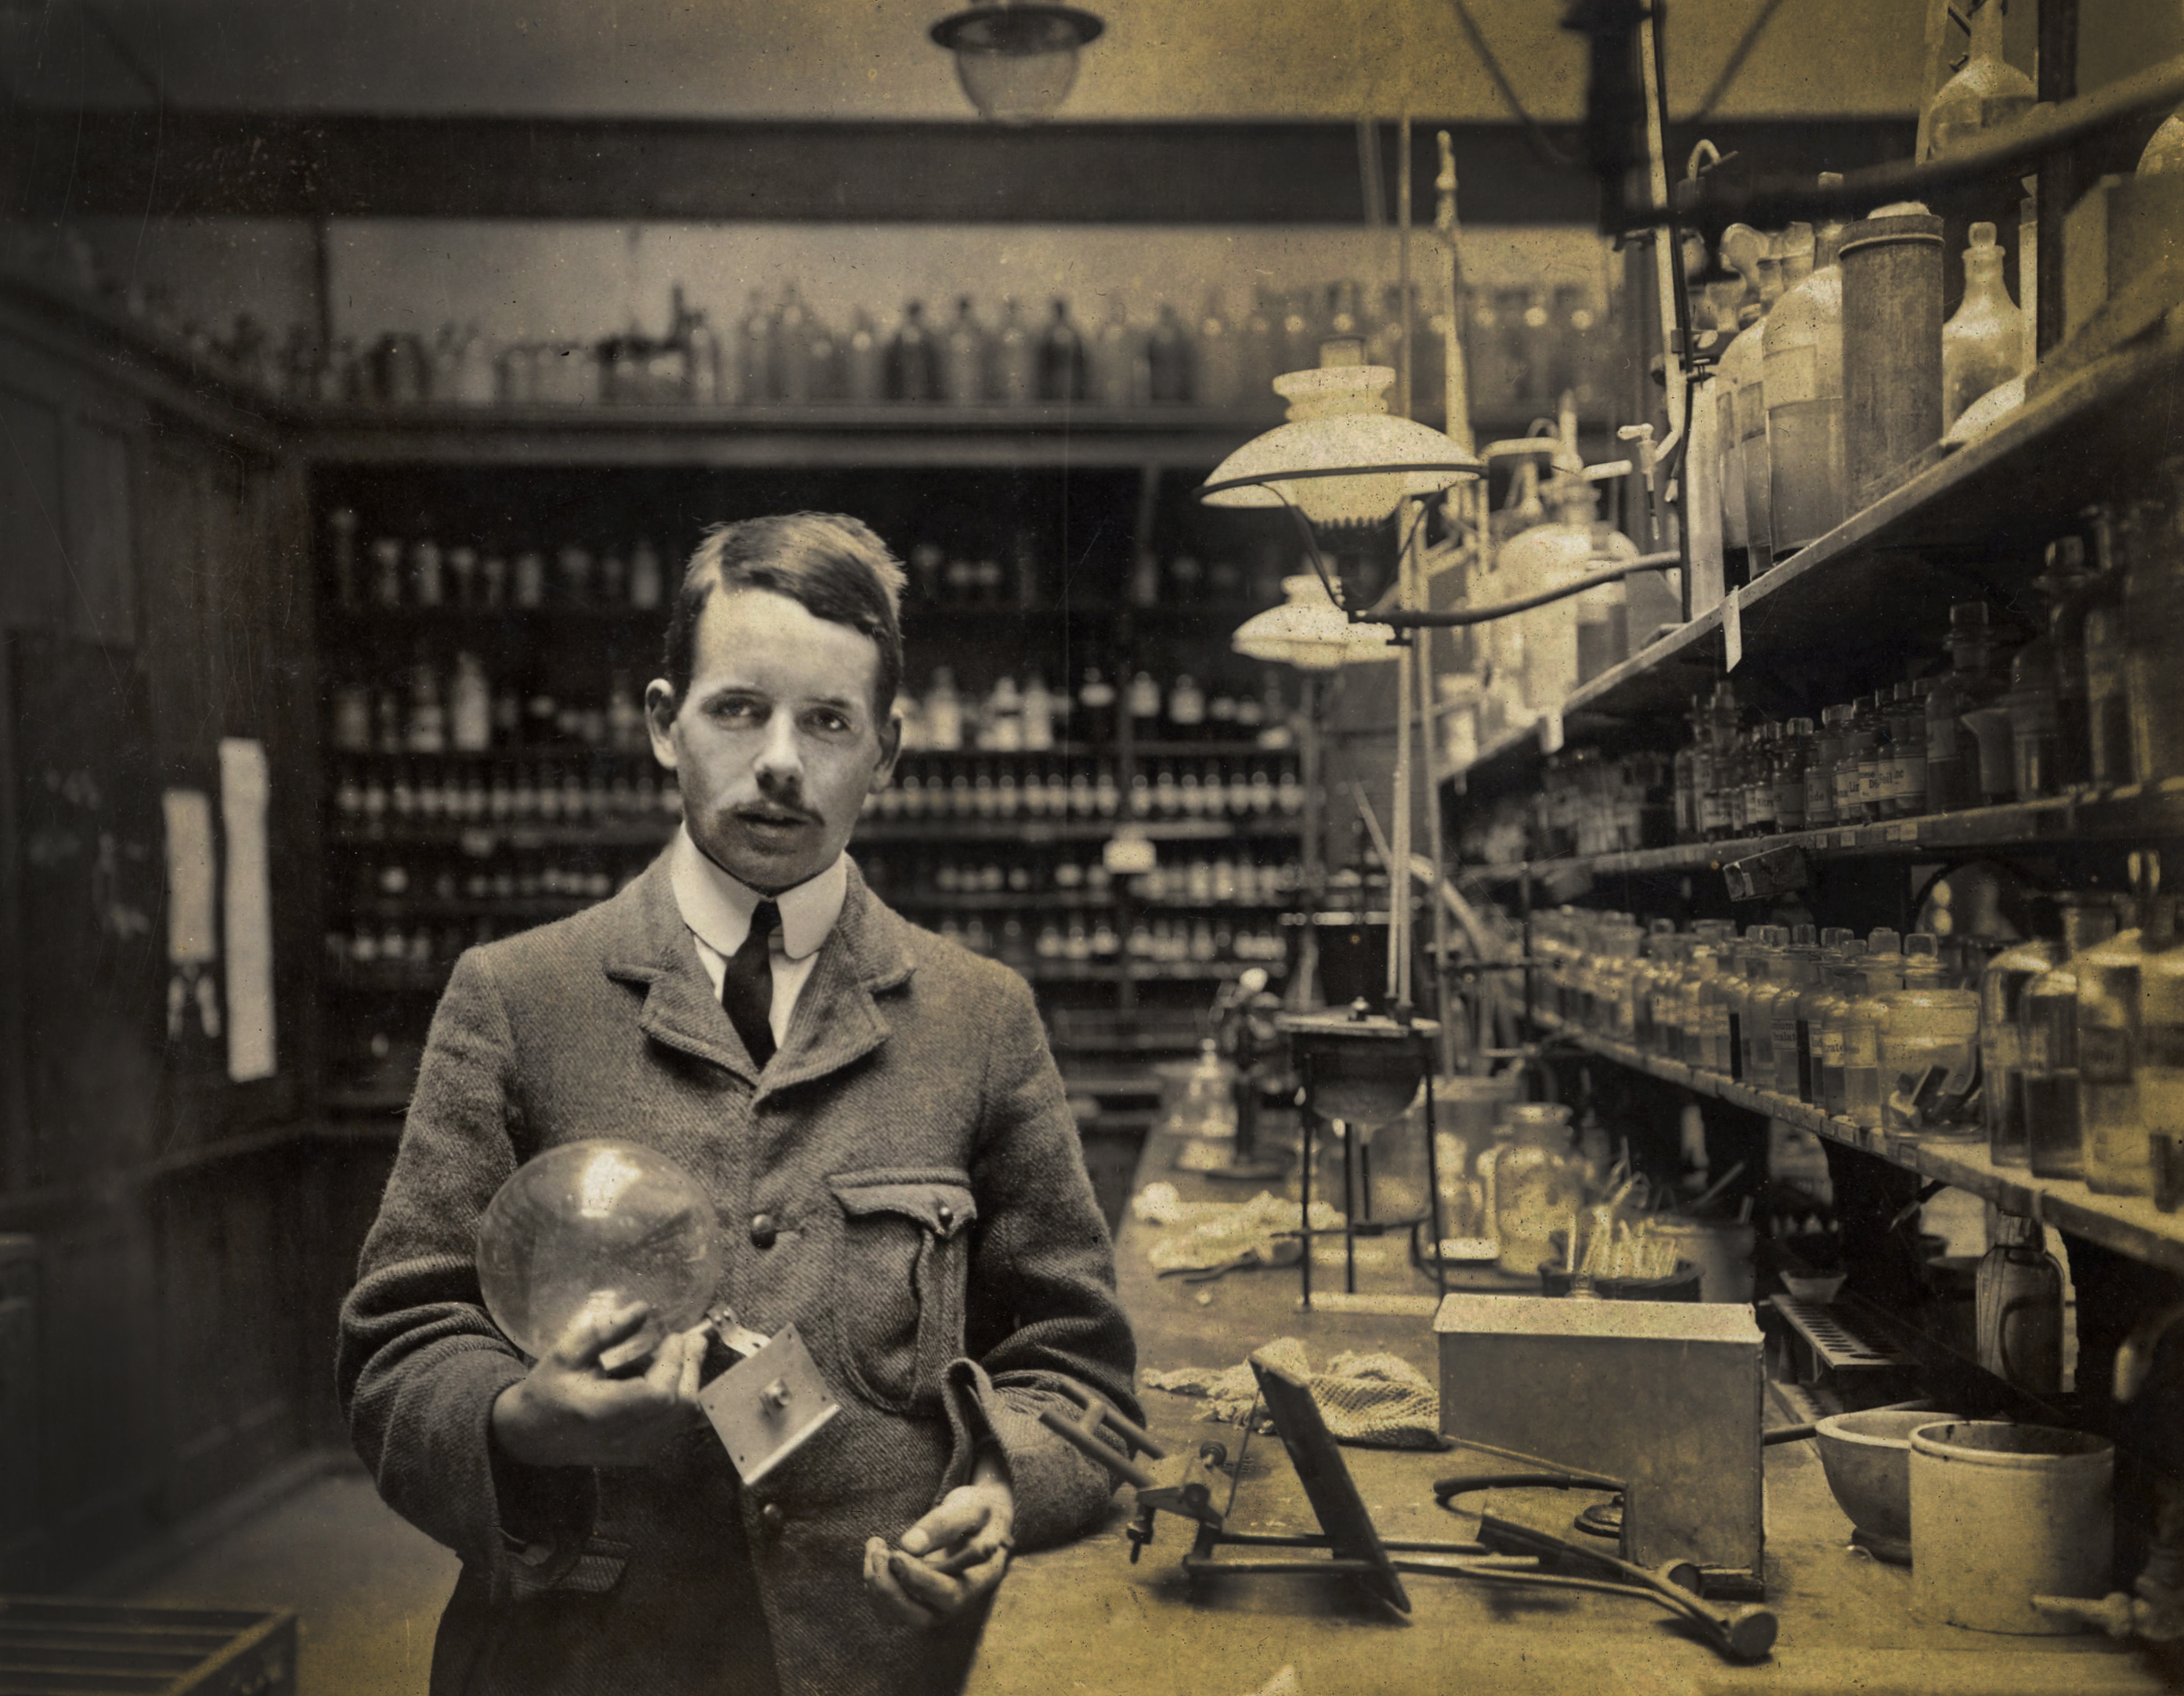 Remembering Henry Moseley